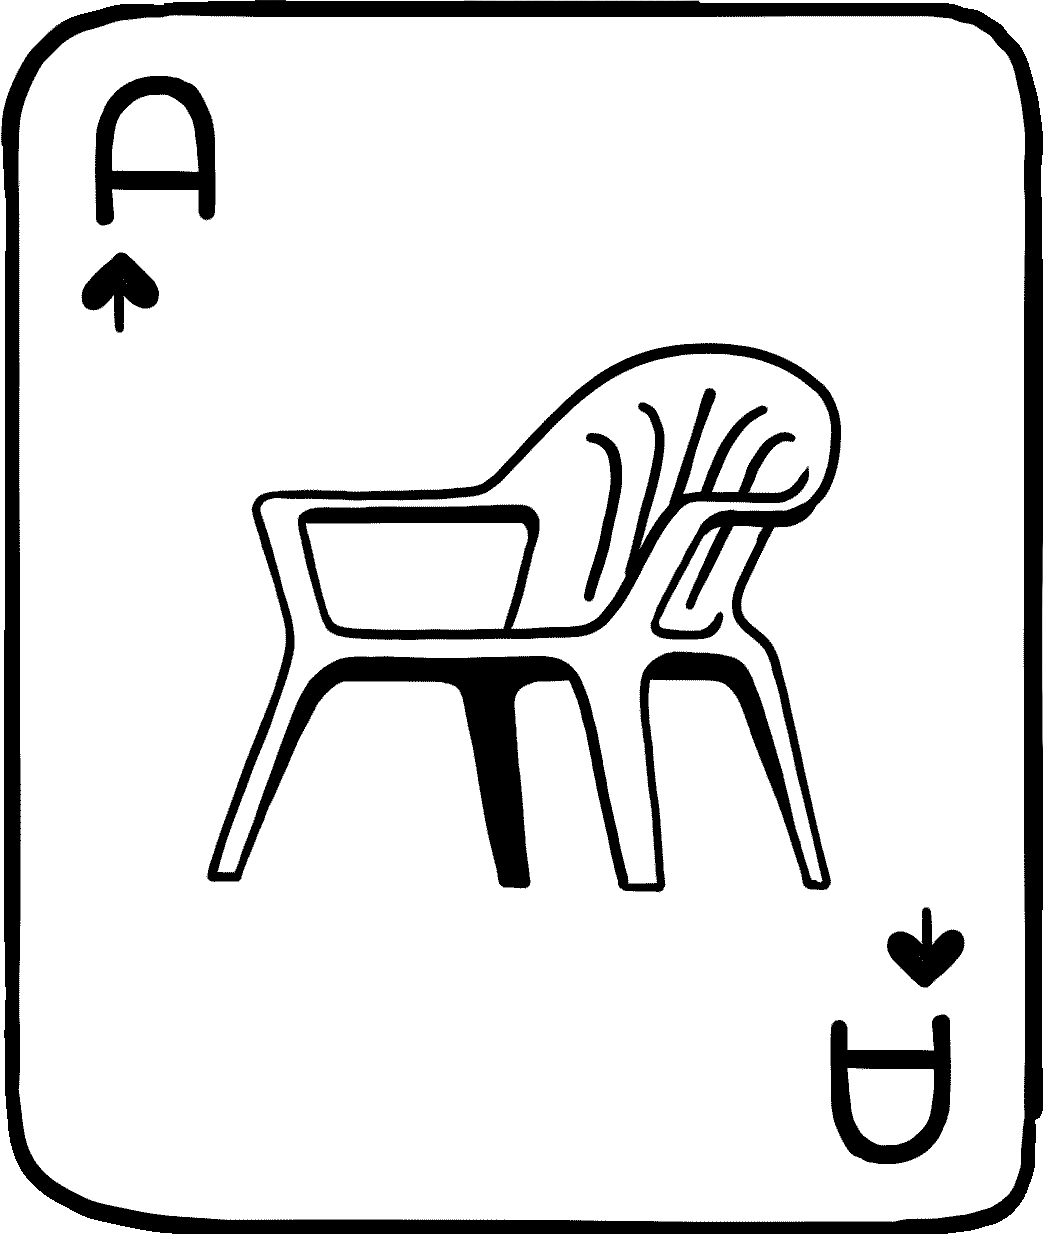 An ace of spades with a monobloc plastic chair on the front